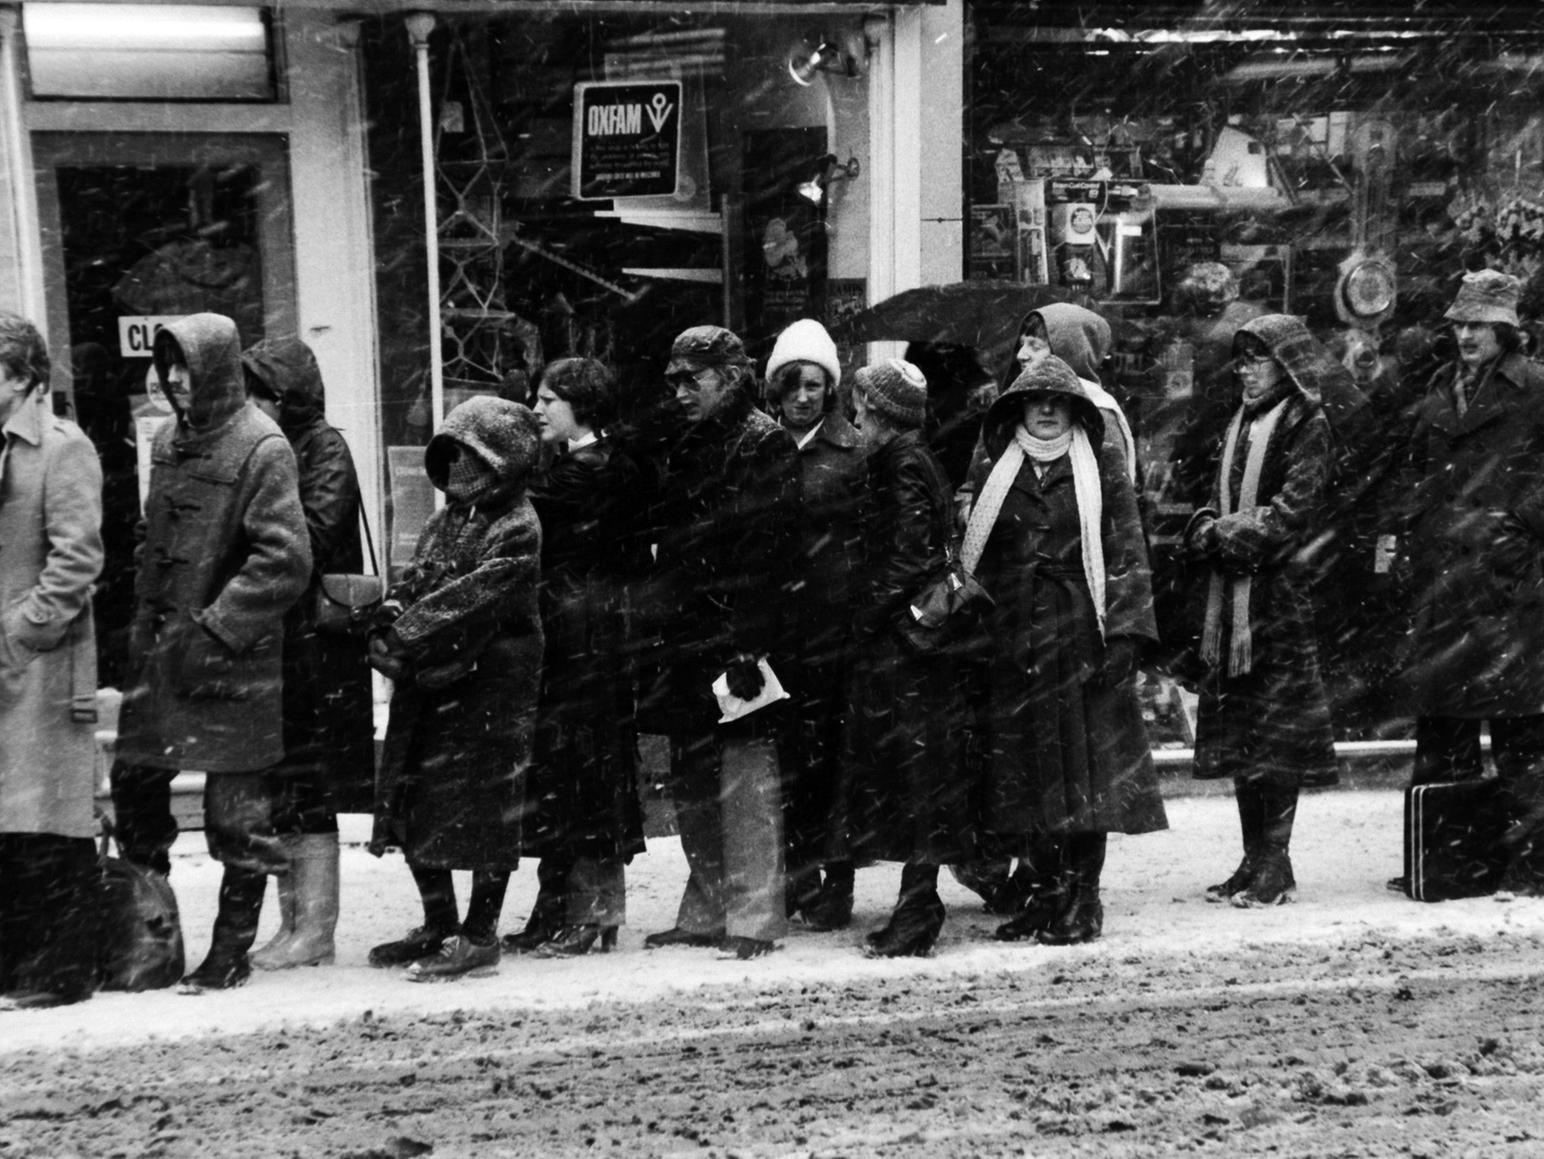 Blizzard conditions on Boar Lane as people queue for a bus to transport them home as the city evening rush hour begins.